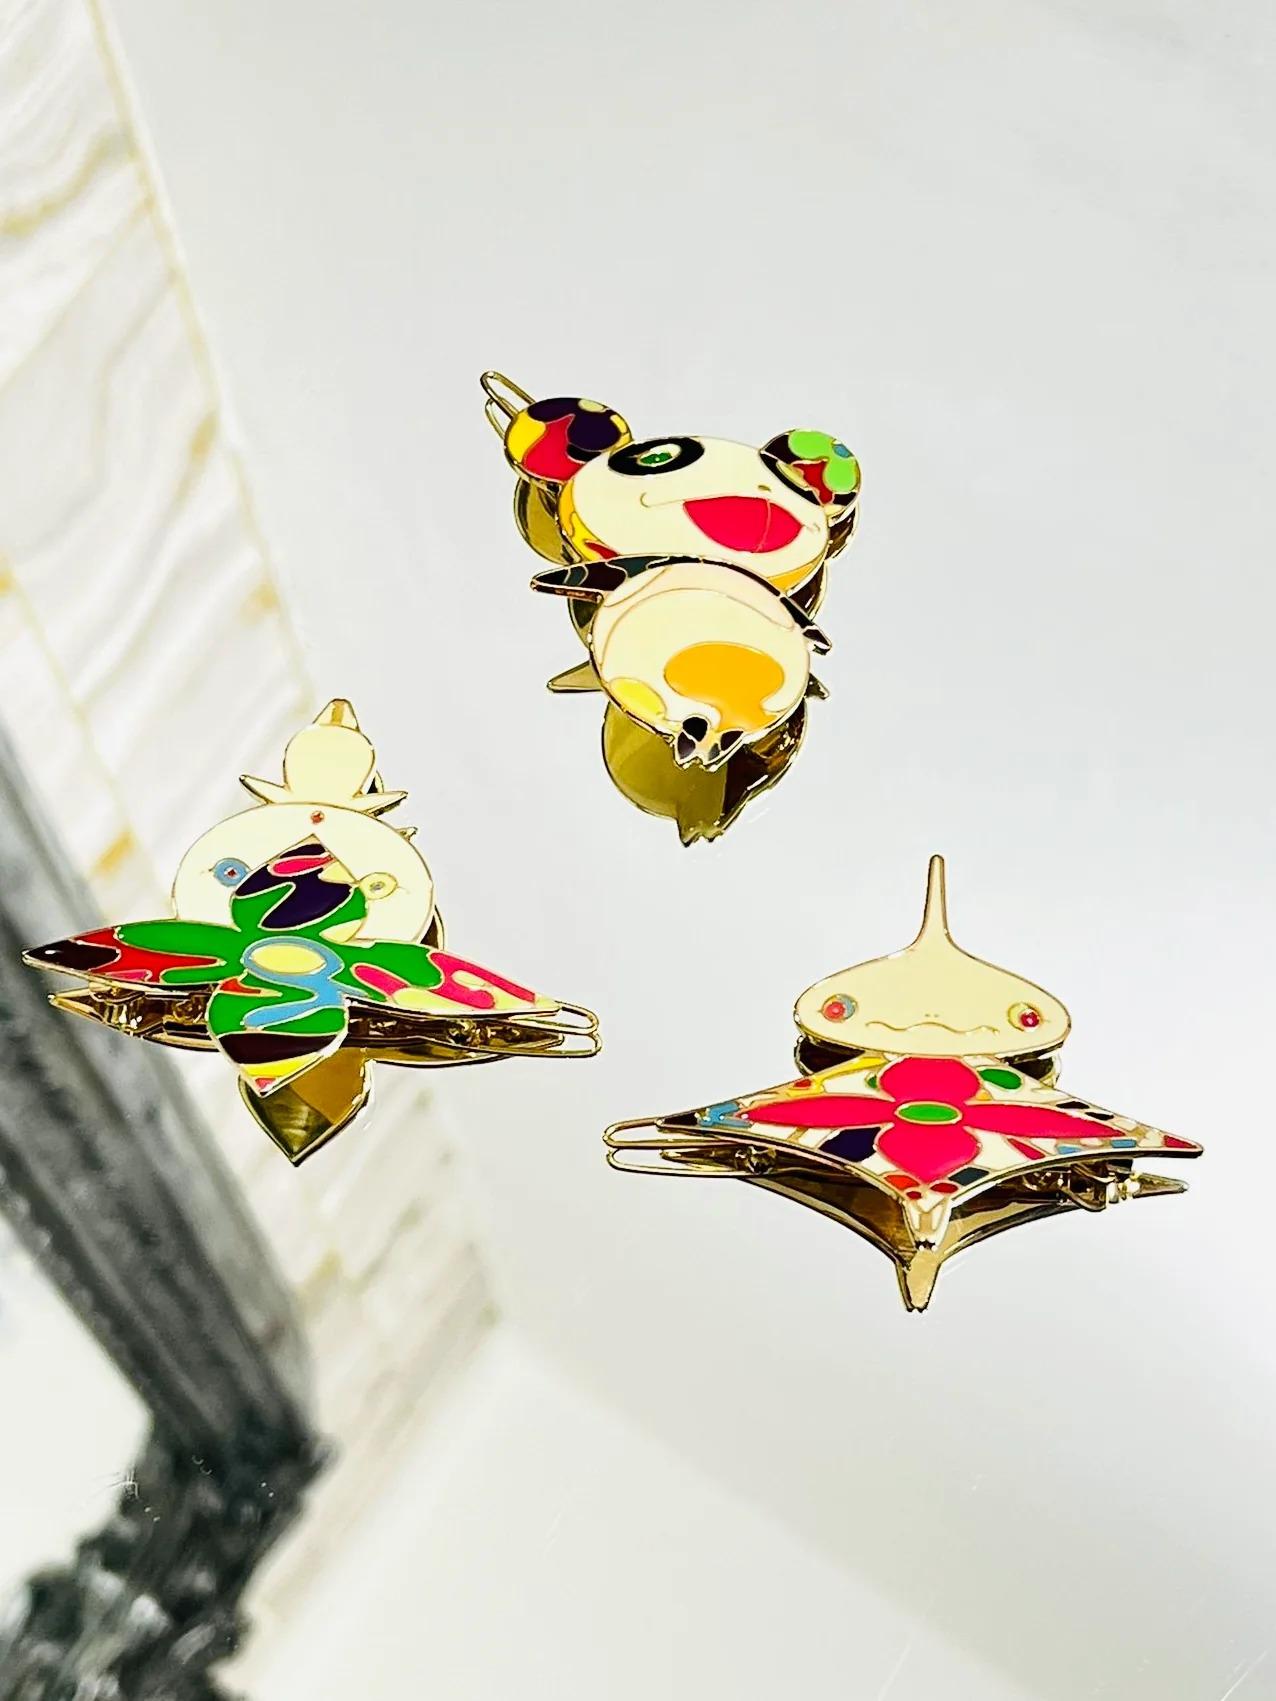 Louis Vuitton Ltd Edition Takashi Murakami Collection Hair Clips

Set of 3 brass and enamel Louis Vuitton hair barrettes with monogram accents throughout and hinged clasp closure at back.

Additional information:
Size – O/S
Composition – Brass,